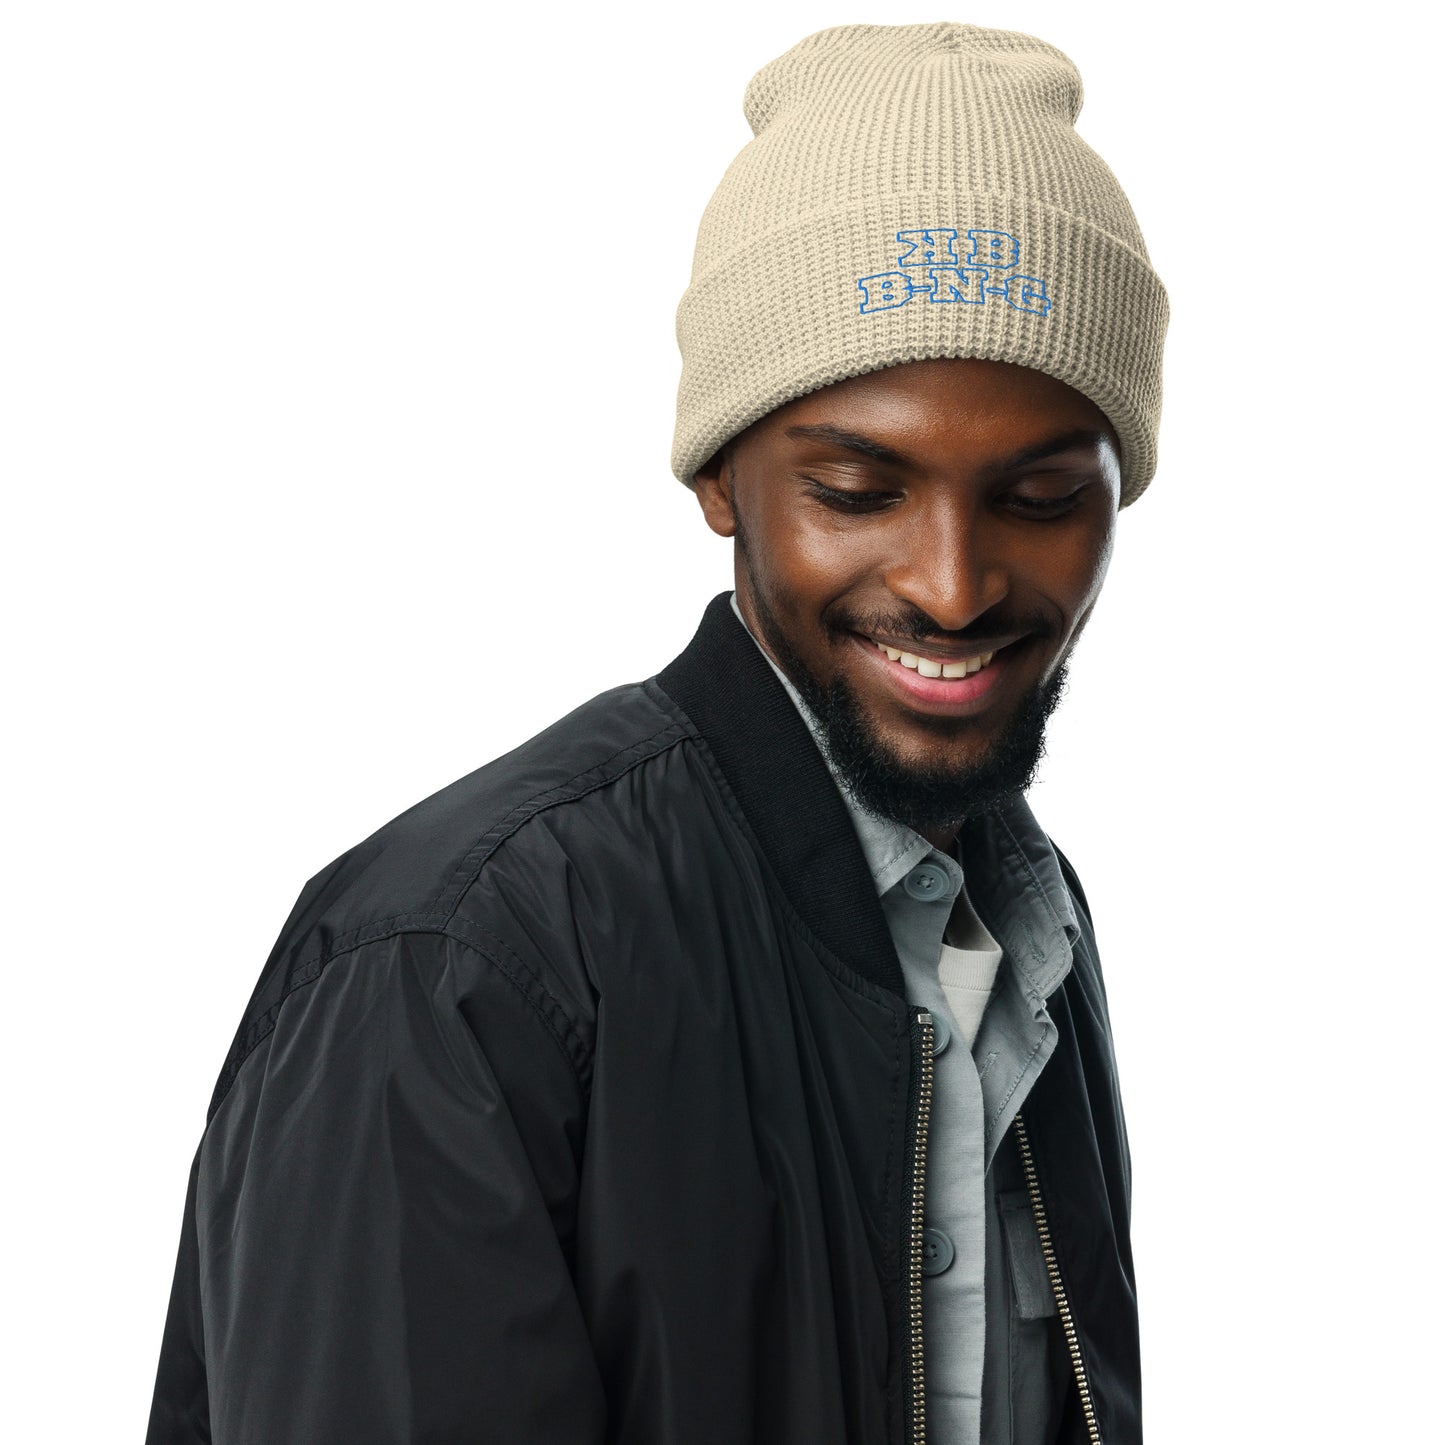 KBBNG Waffle Beanie (Blue Letters)